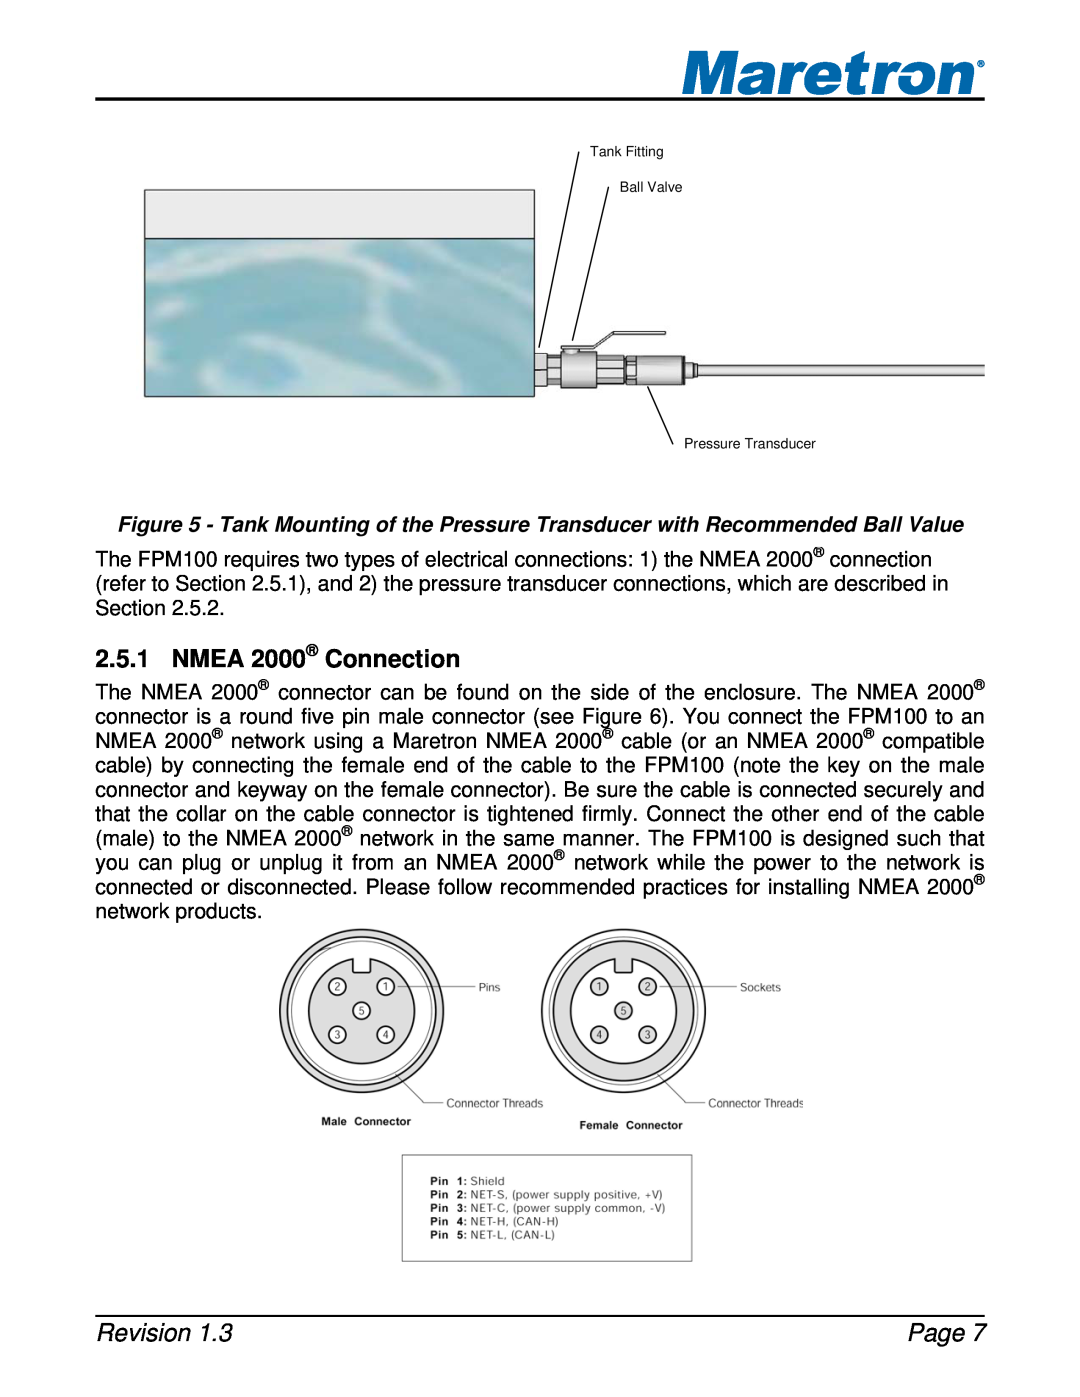 Maretron FPM100 user manual NMEA 2000 Connection, Revision, Page, Tank Fitting Ball Valve Pressure Transducer 